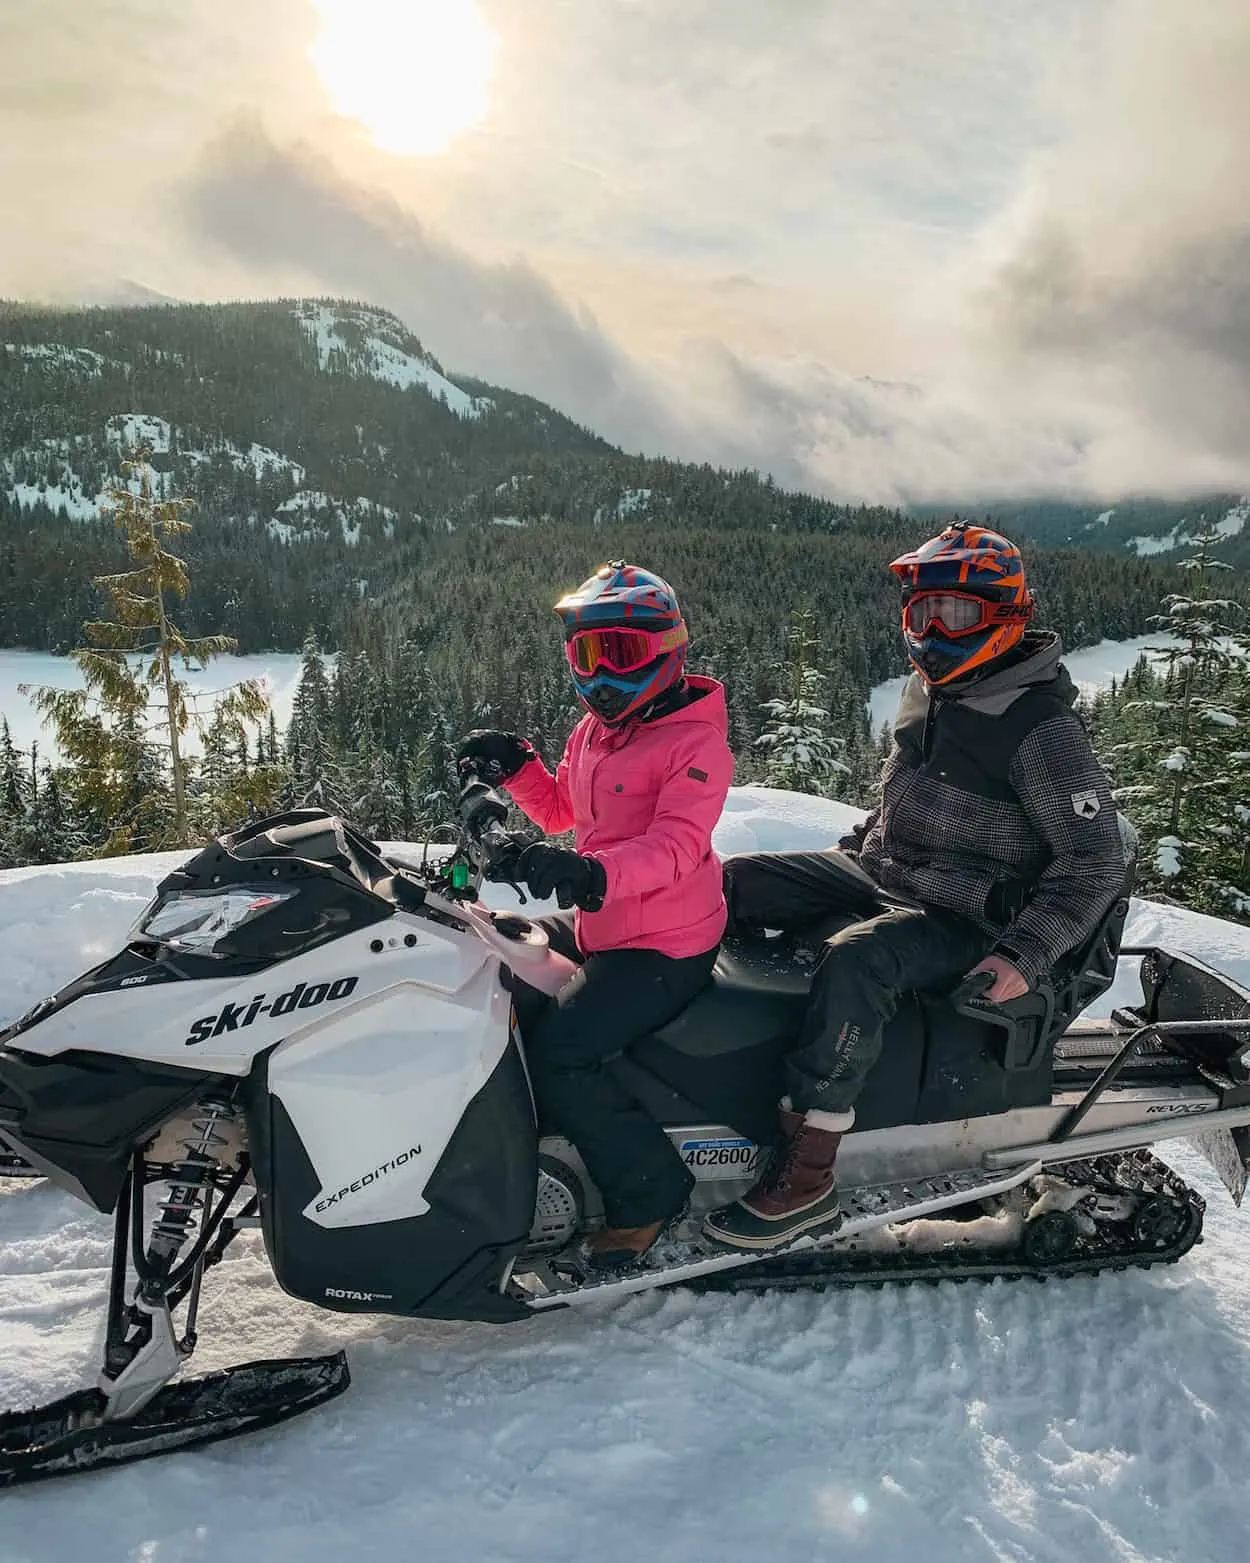 Snowmobile tour with The Adventure Group in Whistler, British Columbia!